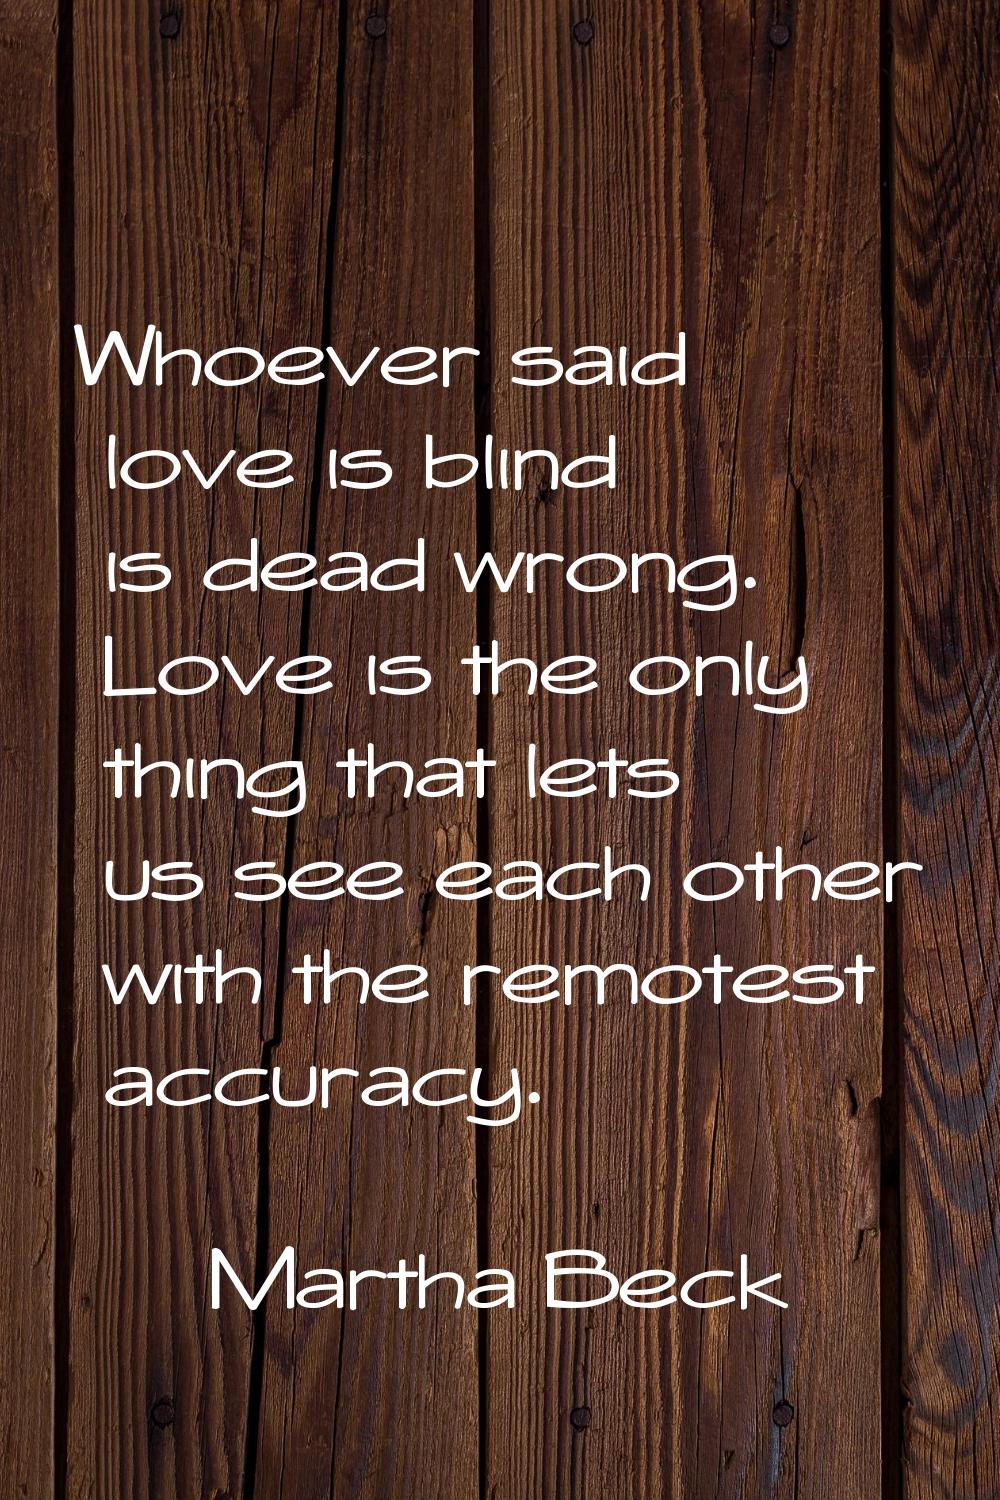 Whoever said love is blind is dead wrong. Love is the only thing that lets us see each other with t